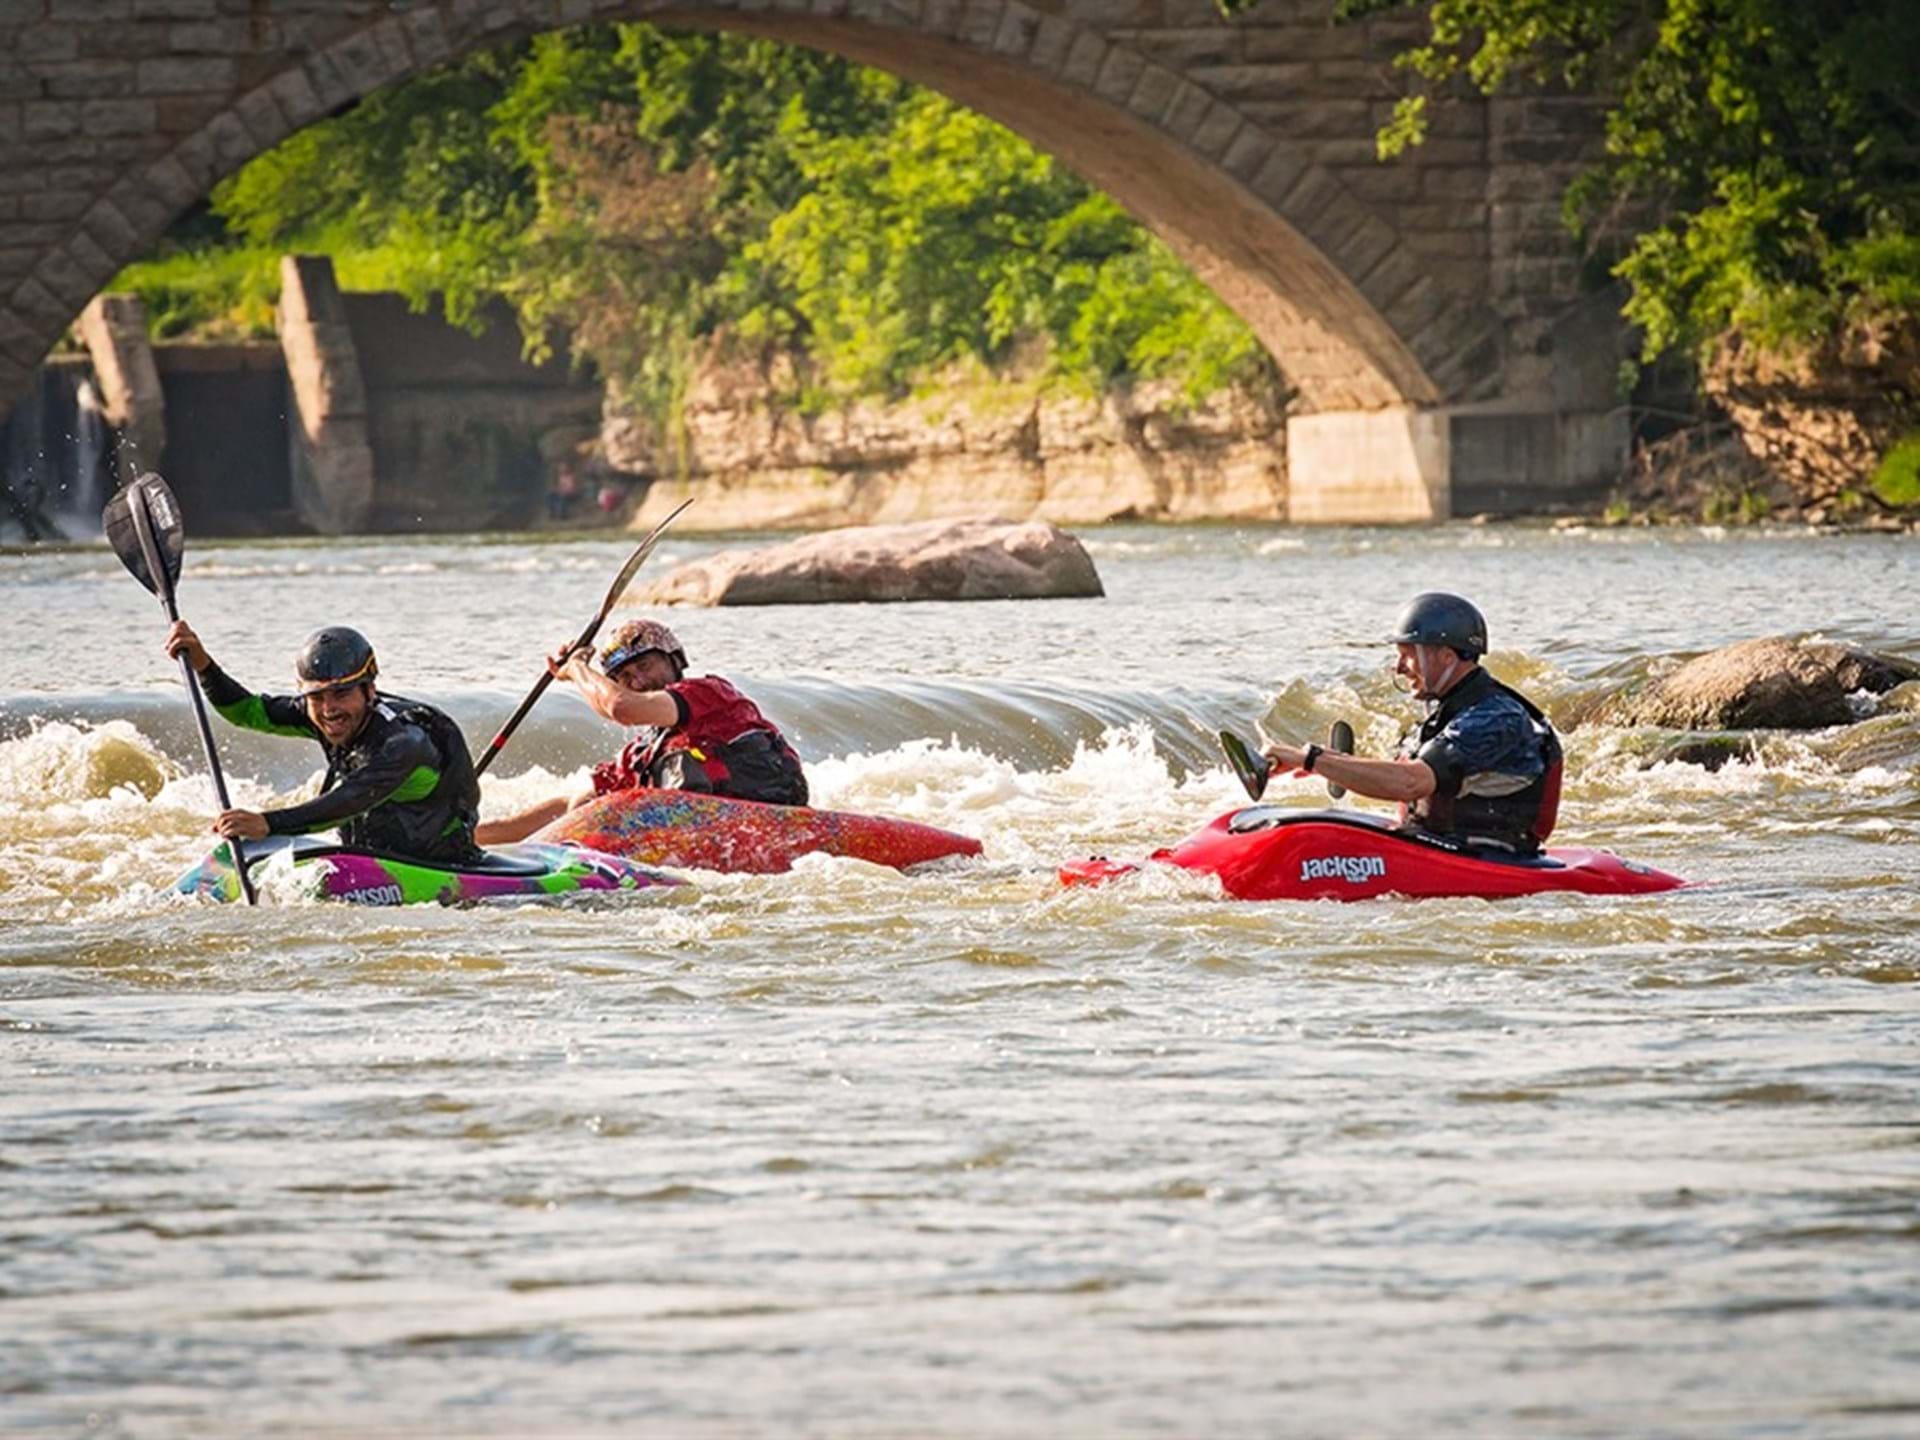 Kayakers on the Gobbler Wave